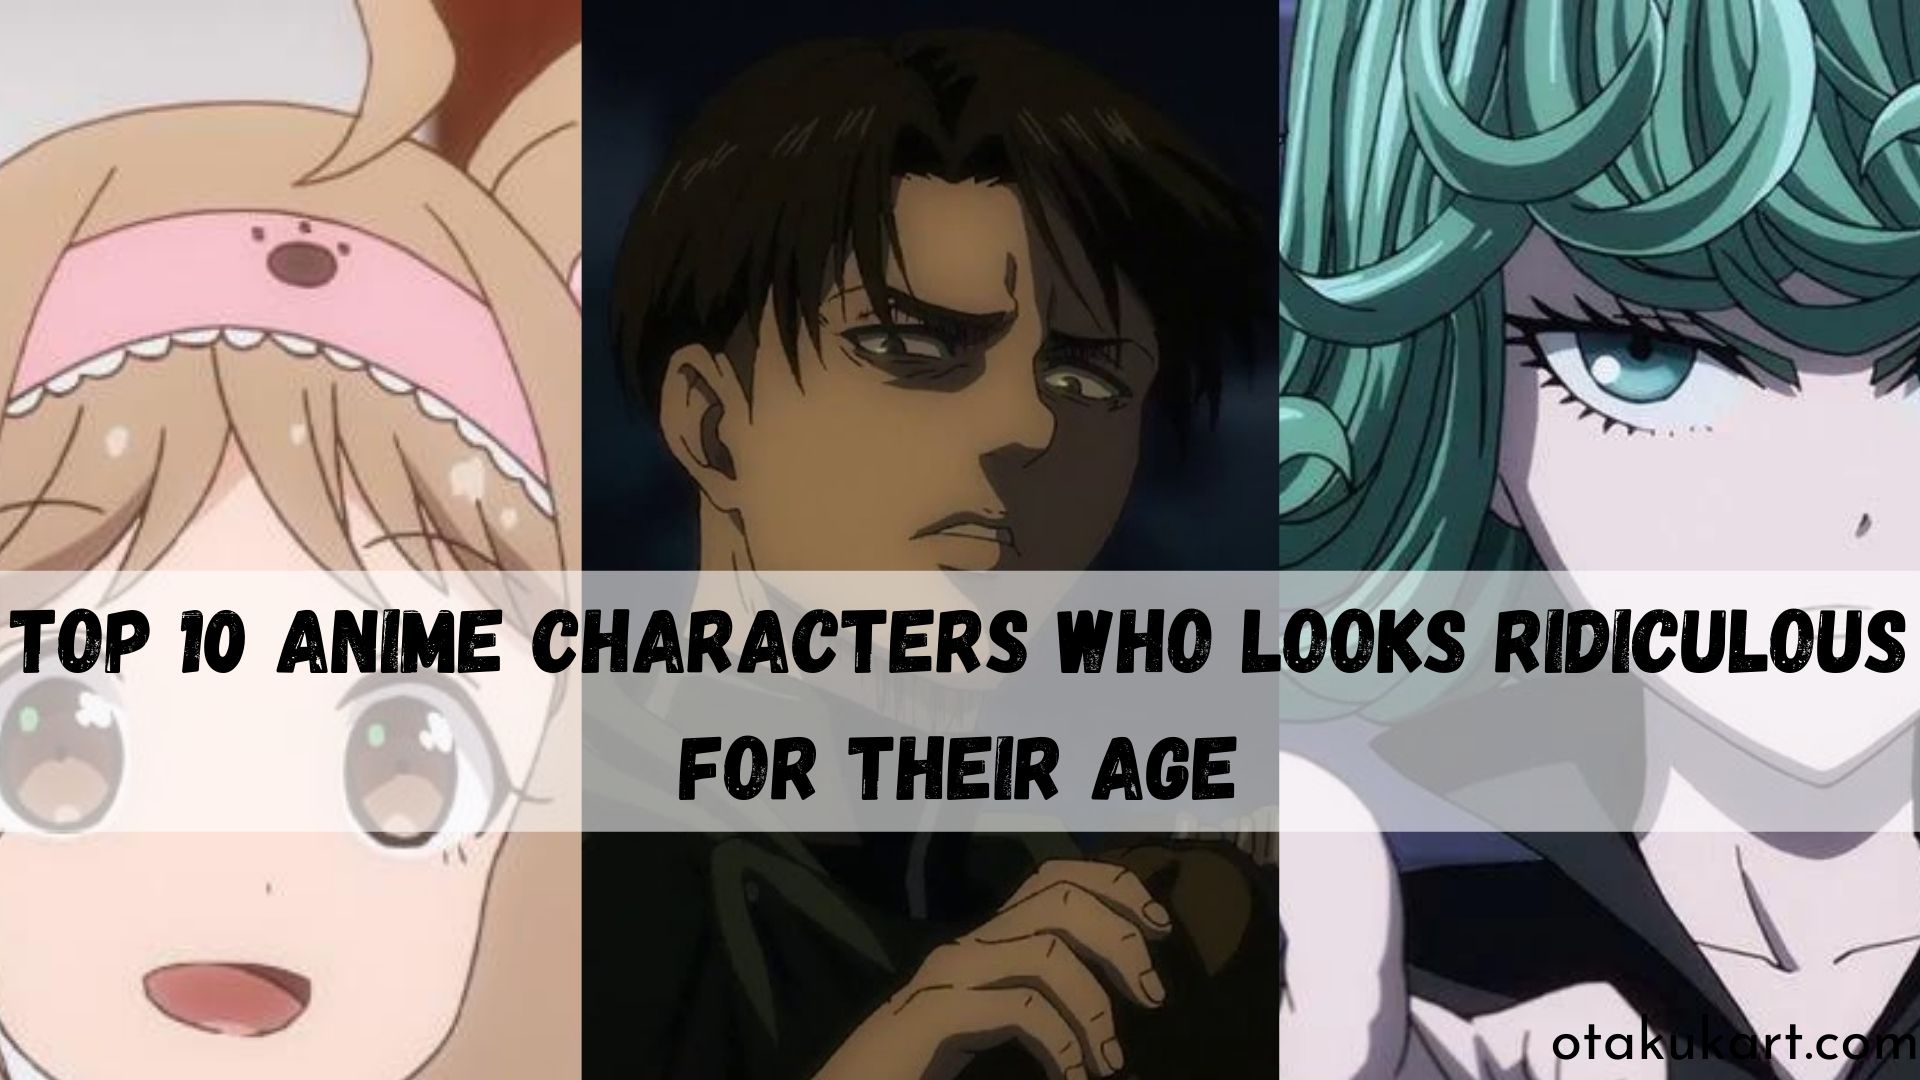 Top 10 Anime Character Who Looks Ridiculous For Their Age - OtakuKart